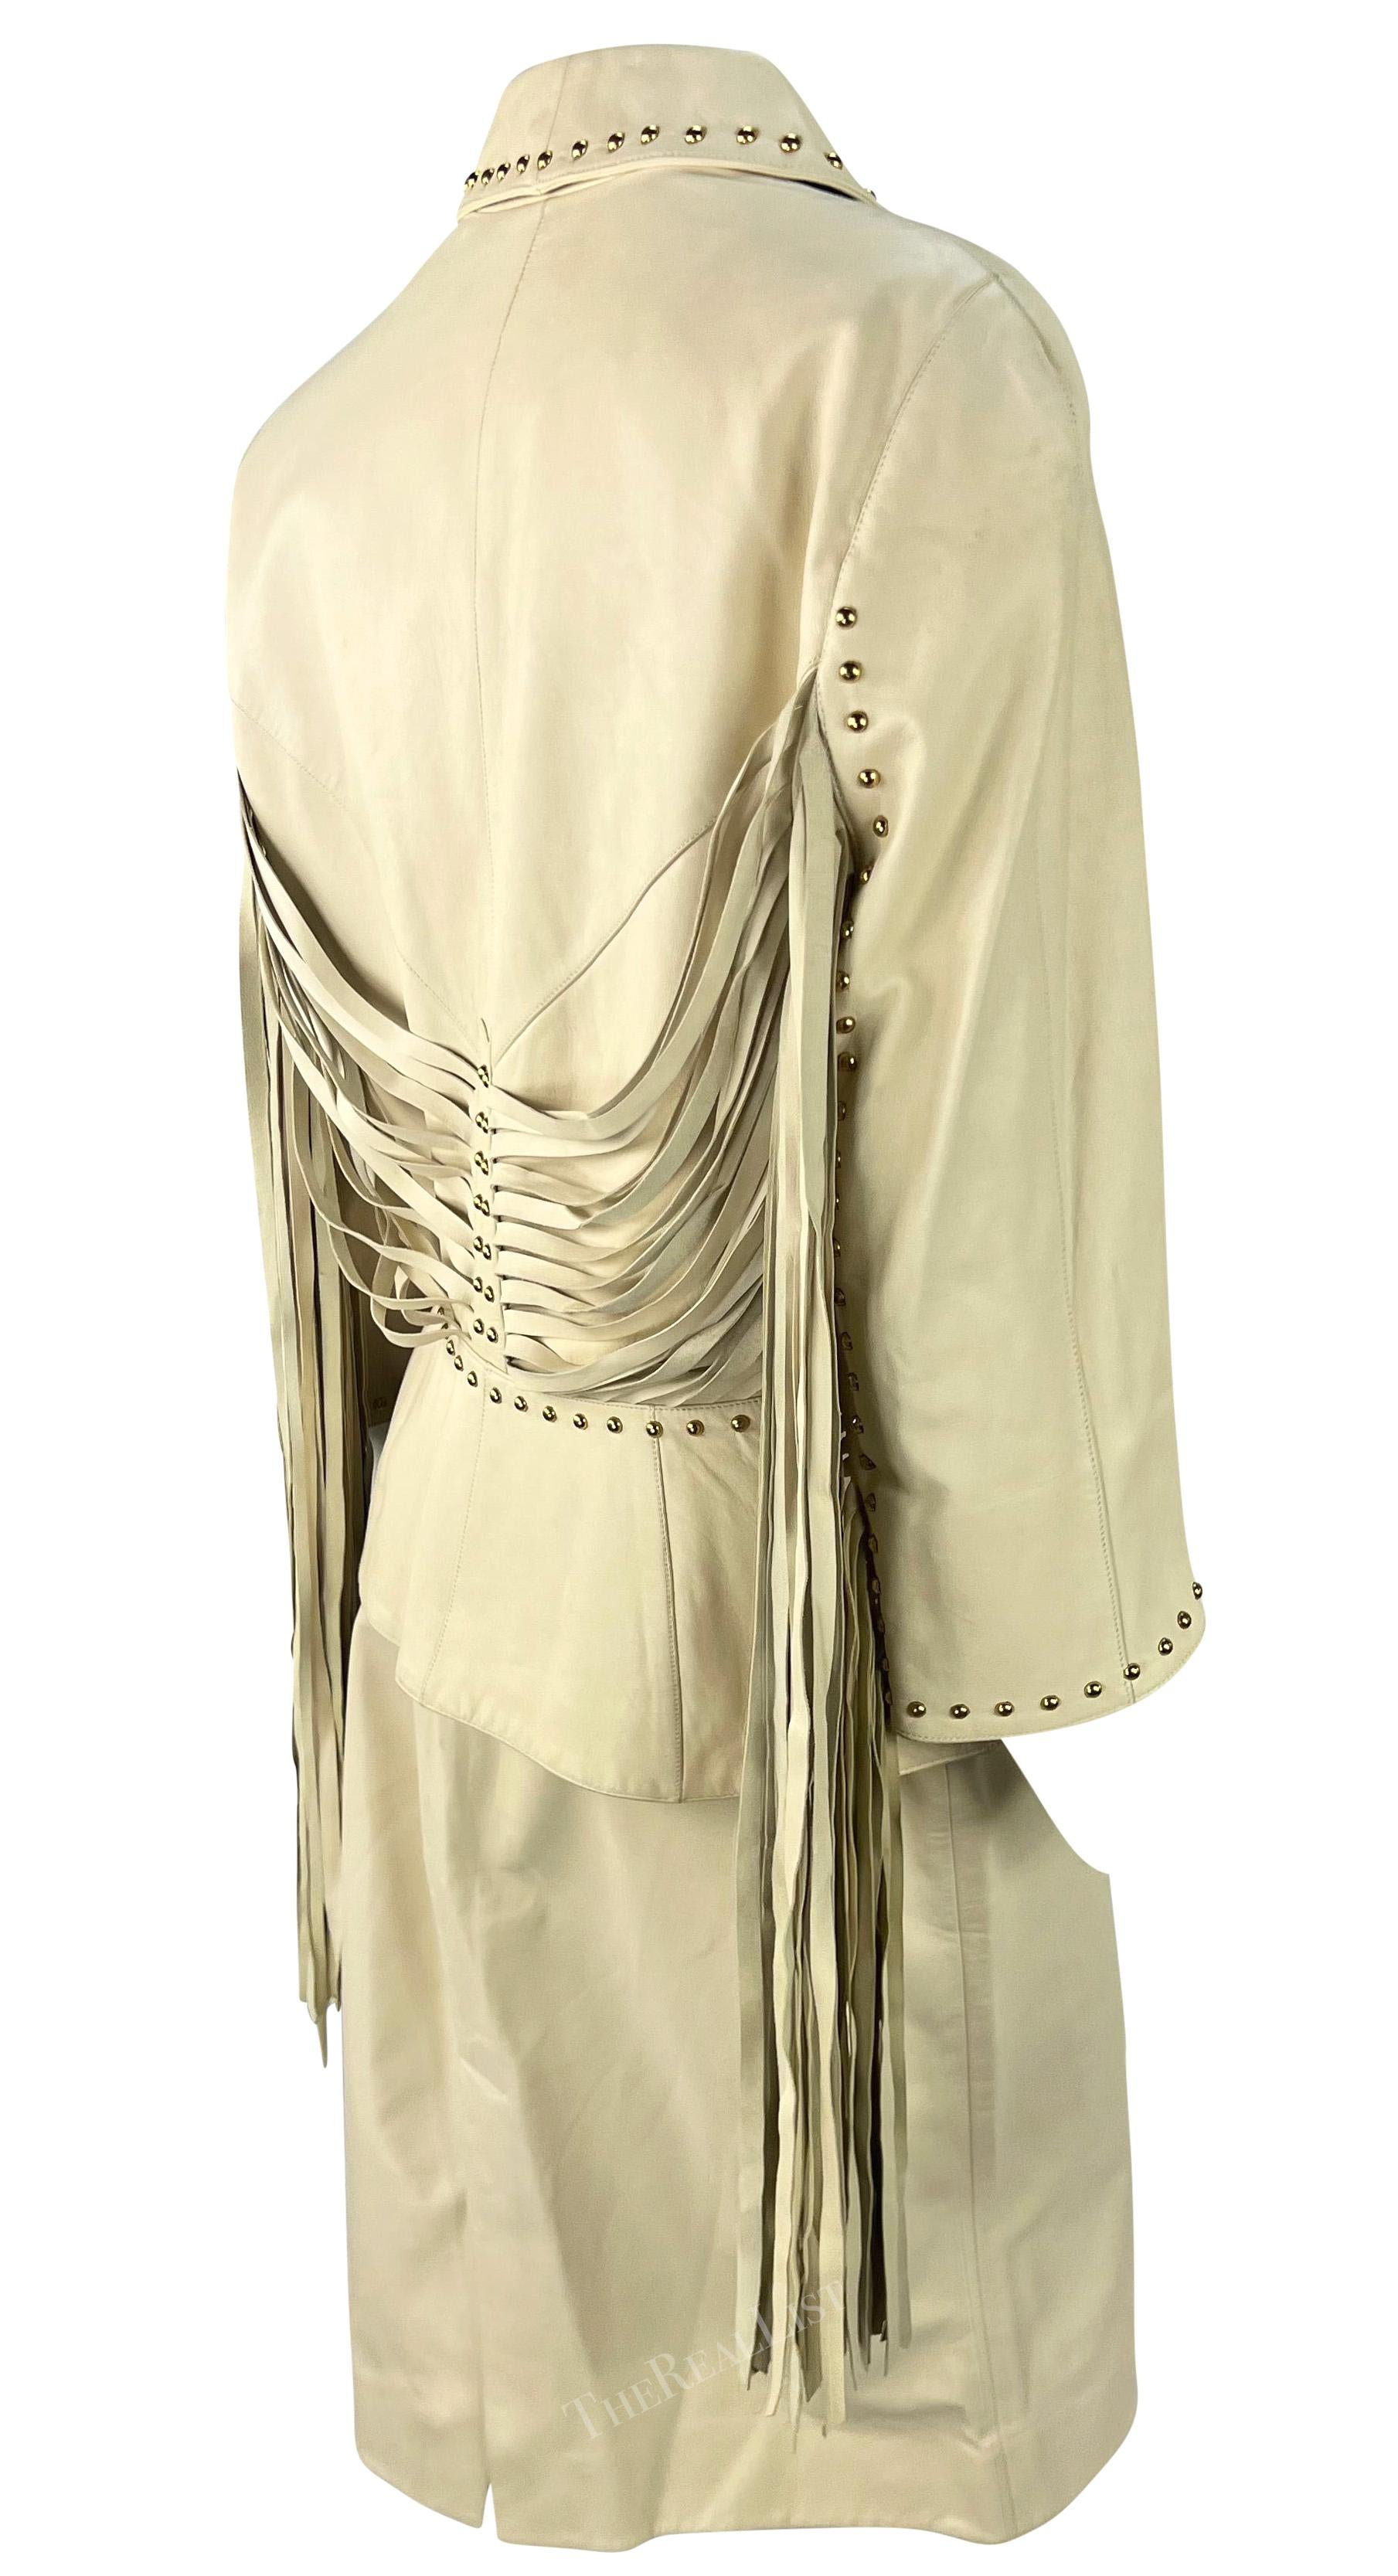 Women's Early 2000s Thierry Mugler Couture Studded Beige Leather Fringe Skirt Suit For Sale